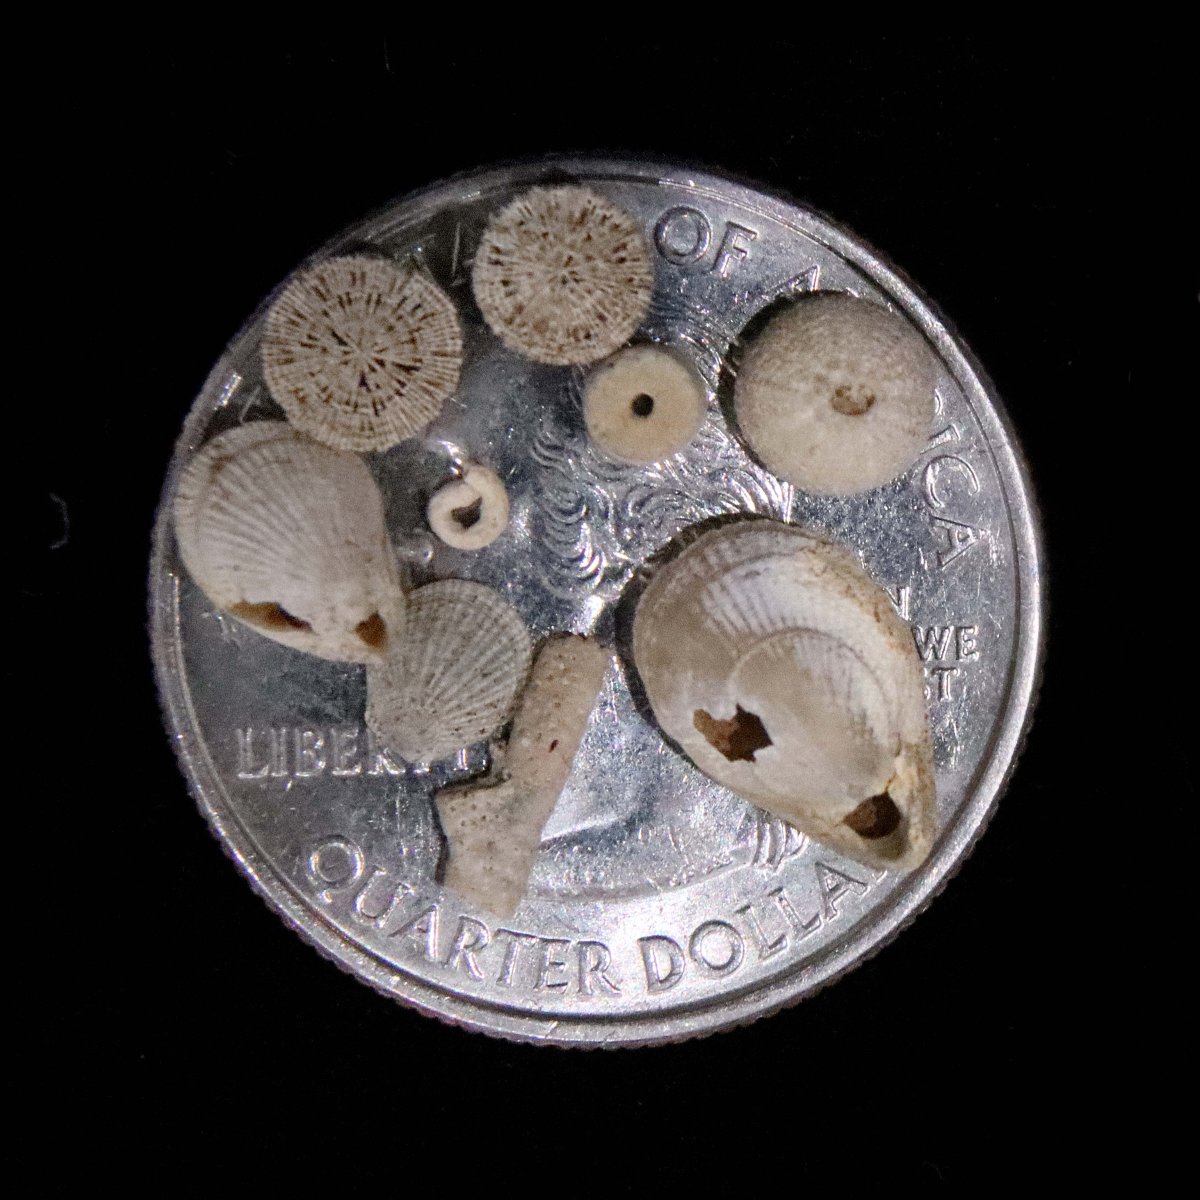 canal finds 1-14-21.jpg